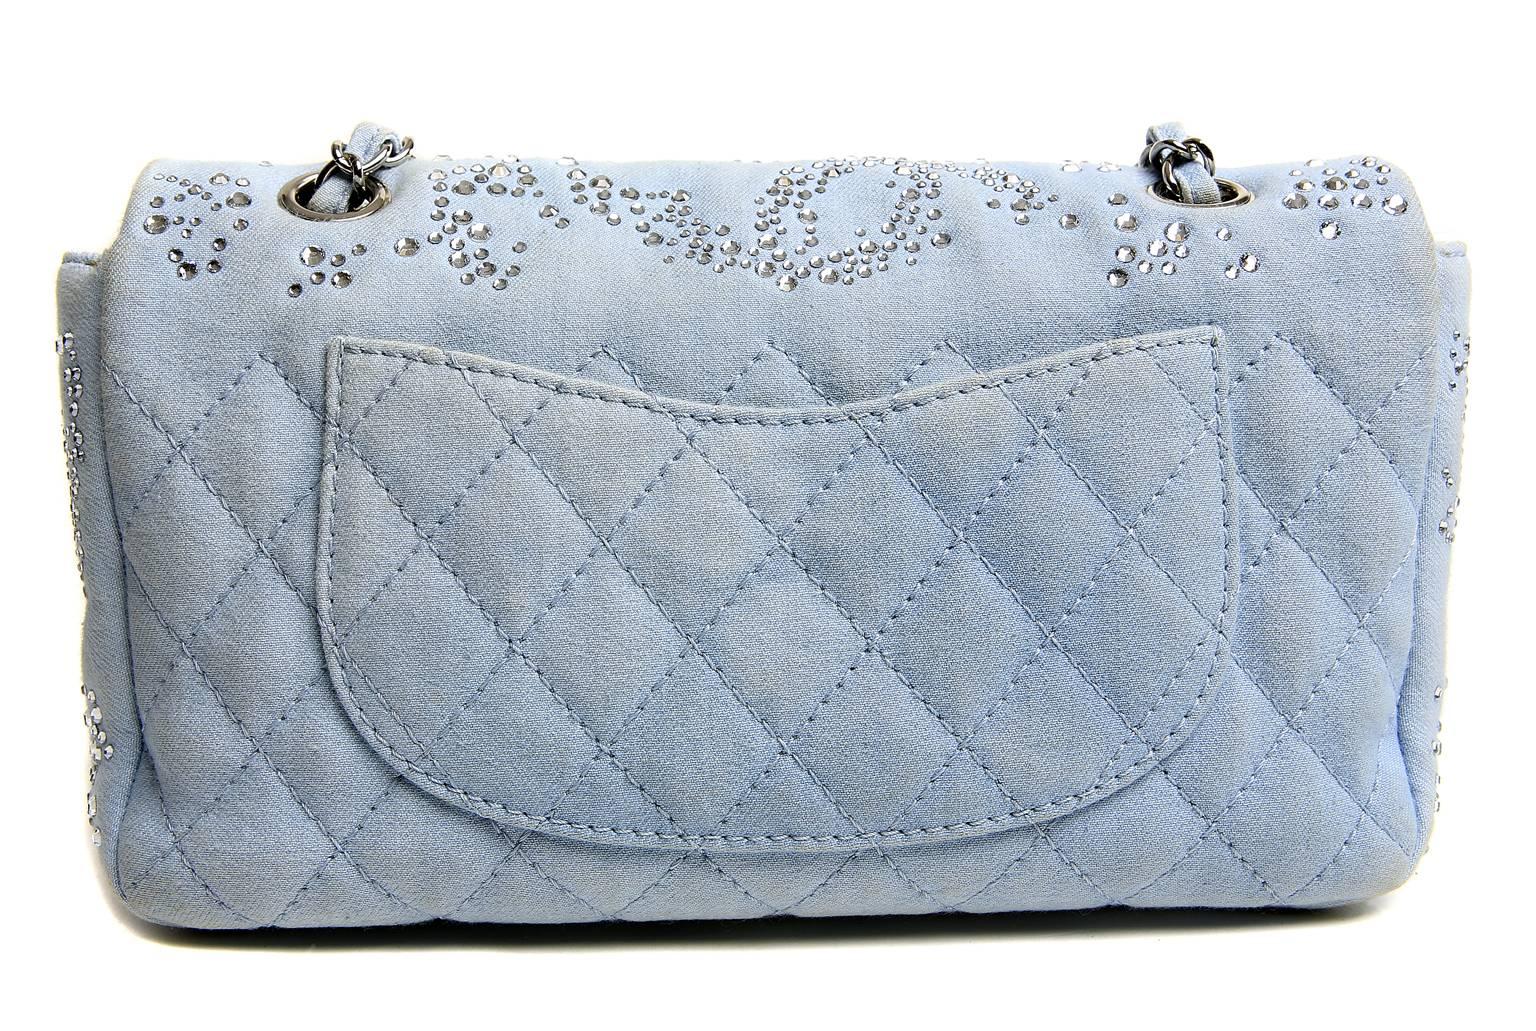 Chanel Powder Blue Swarovski Crystal Classic Flap- EXCELLENT
Collectible Chanel in beautiful condition.  The classic design is enhanced with a glittering array of the Austrian crystals; eye catching and unique.
 
Powder blue fabric single flap